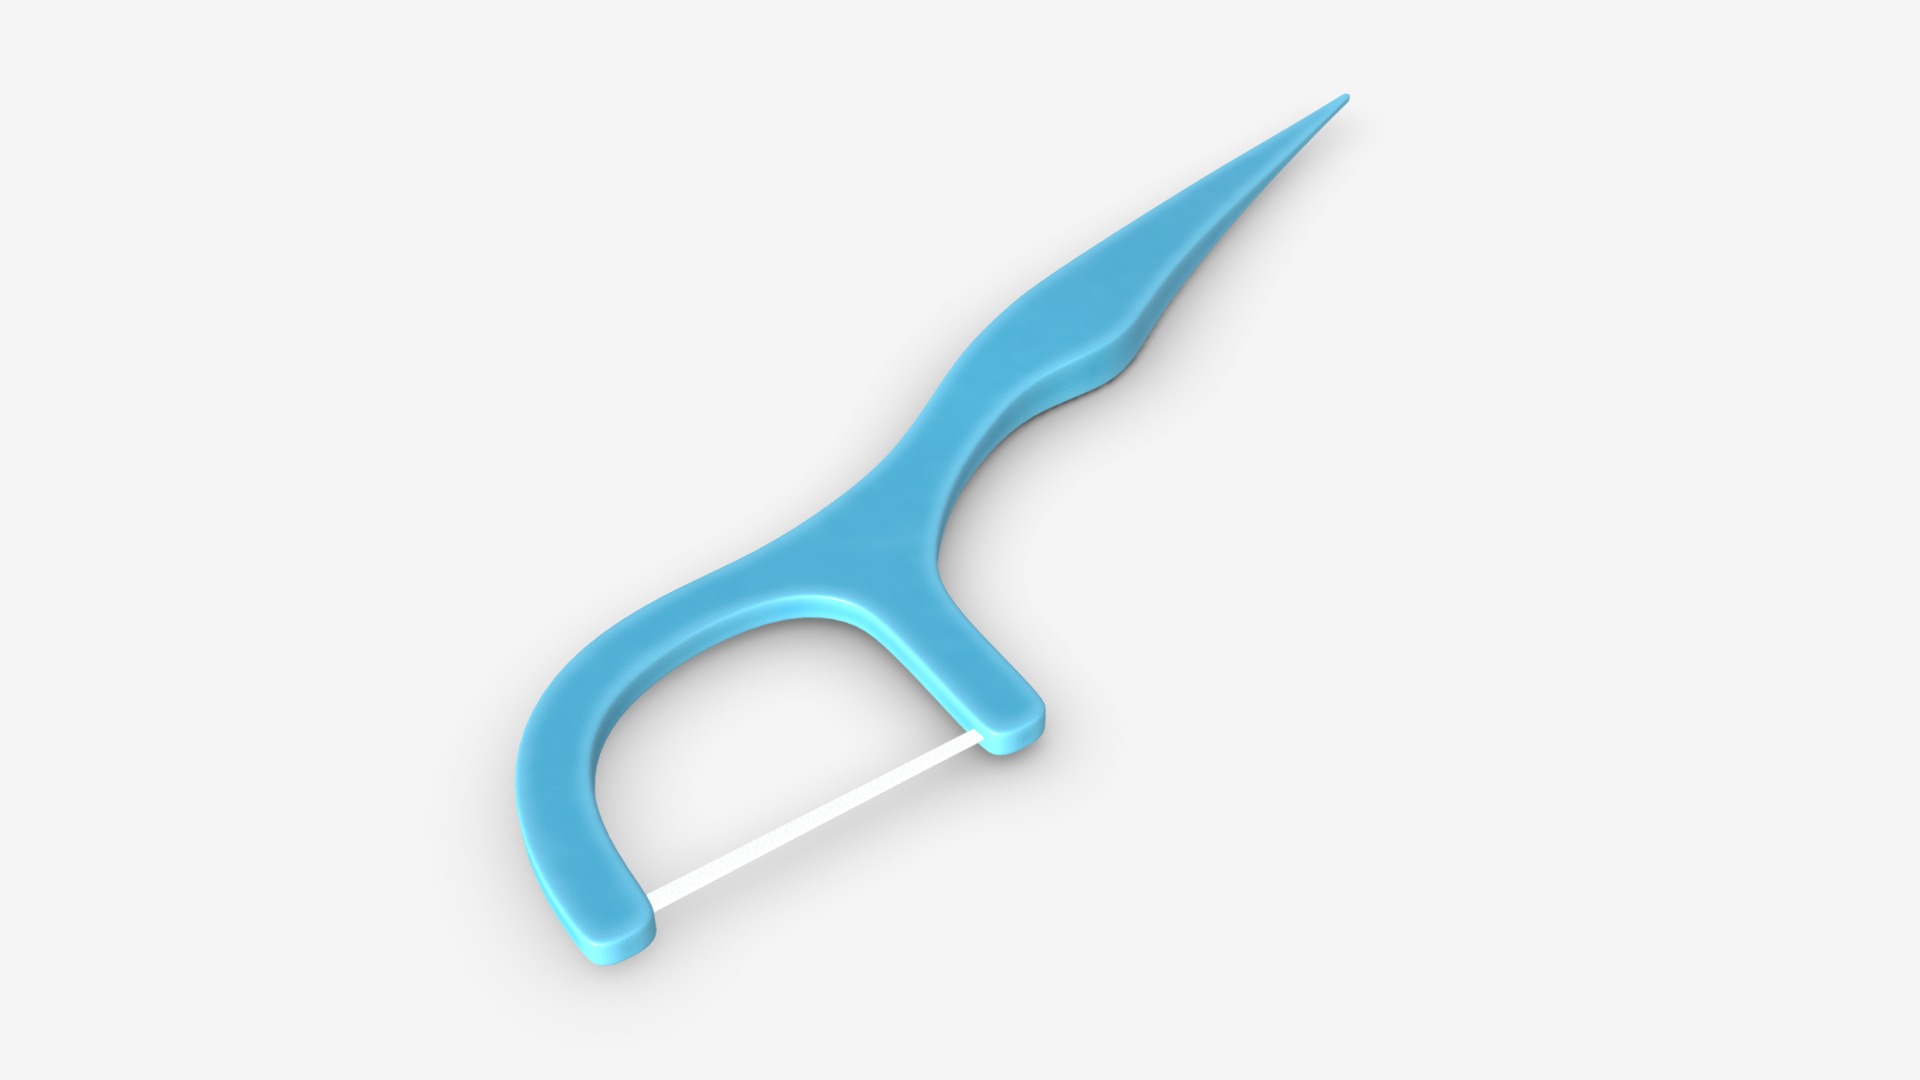 3D model Dental floss pick with flat thread and wide bow - This is a 3D model of the Dental floss pick with flat thread and wide bow. The 3D model is about a blue scissor on a white background.